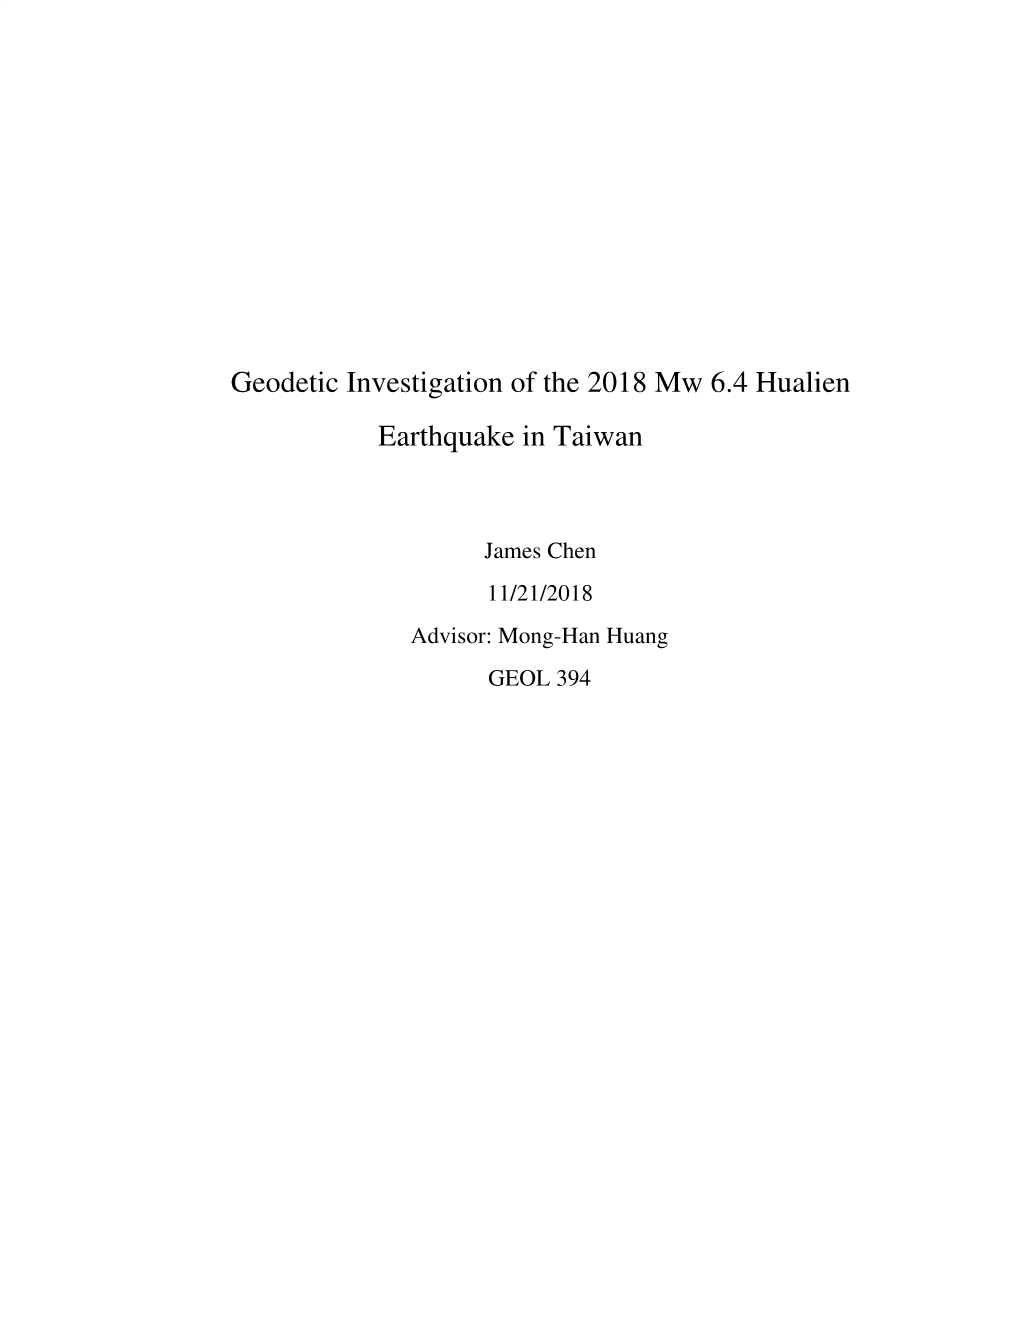 Geodetic Investigation of the 2018 Mw 6.4 Hualien Earthquake in Taiwan